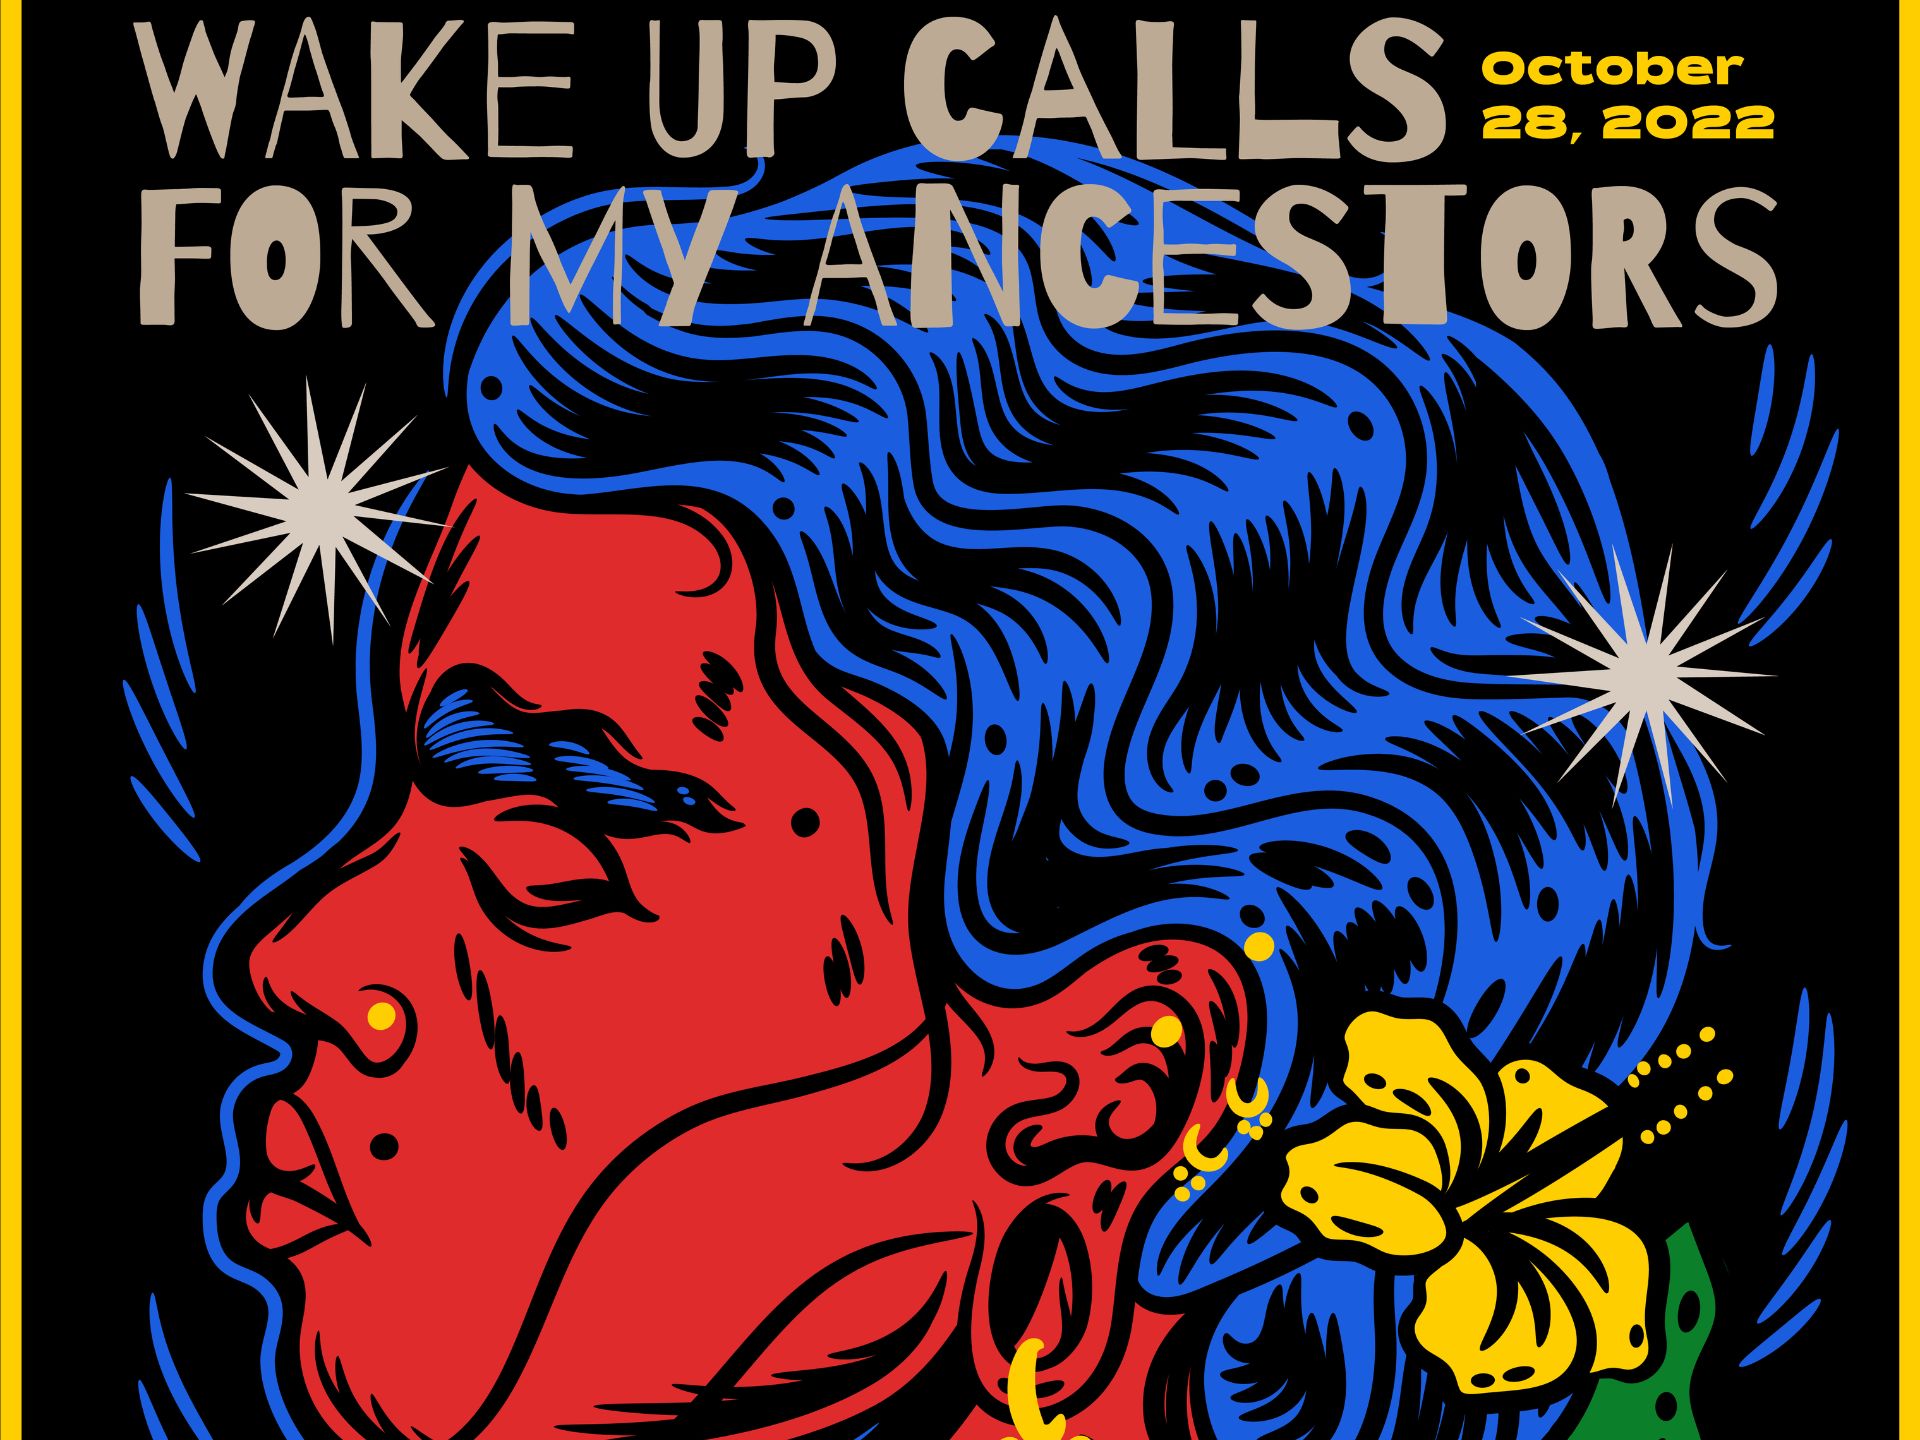 Exhibition | WAKE UP CALLS FOR MY ANCESTORS